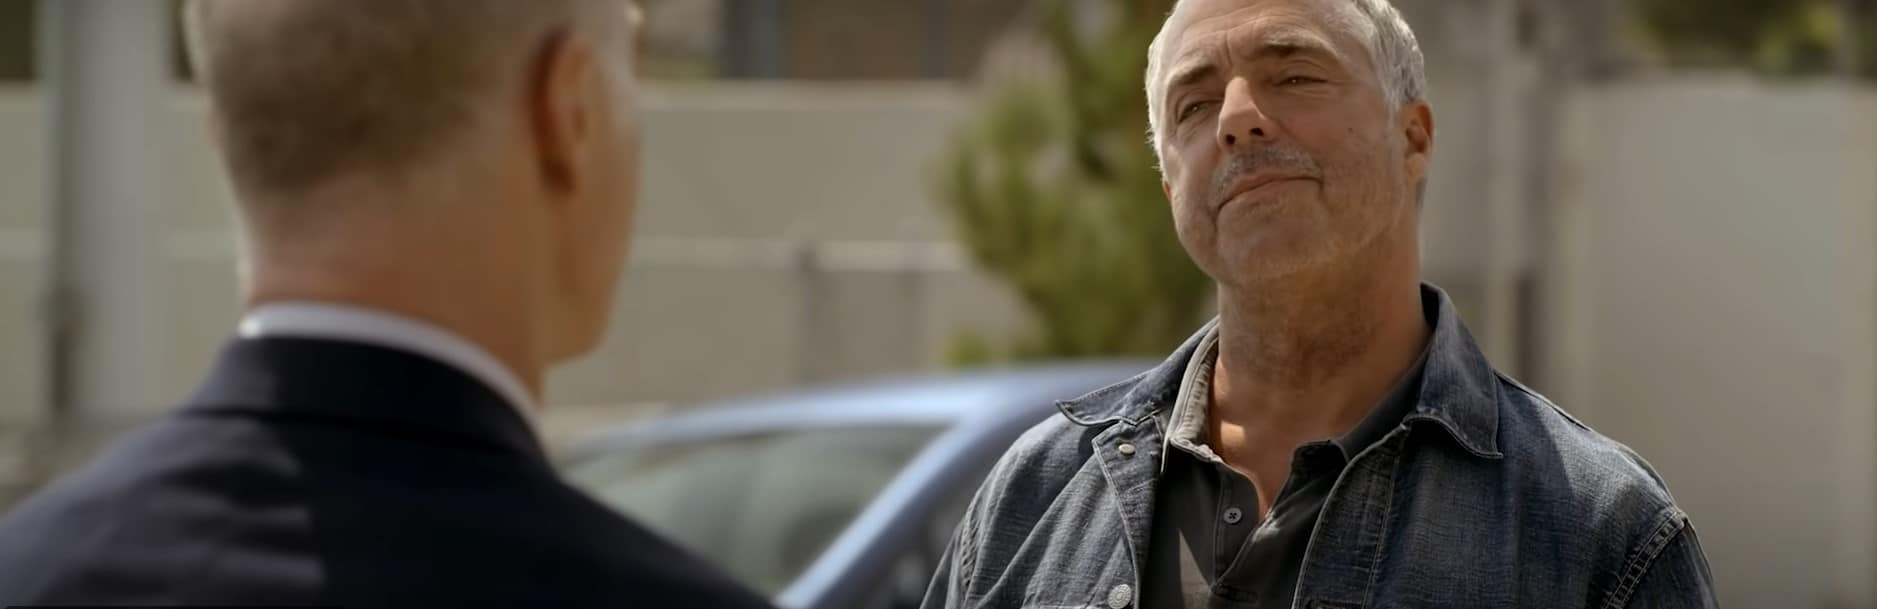 How to watch Bosch: Legacy season 2 episodes?